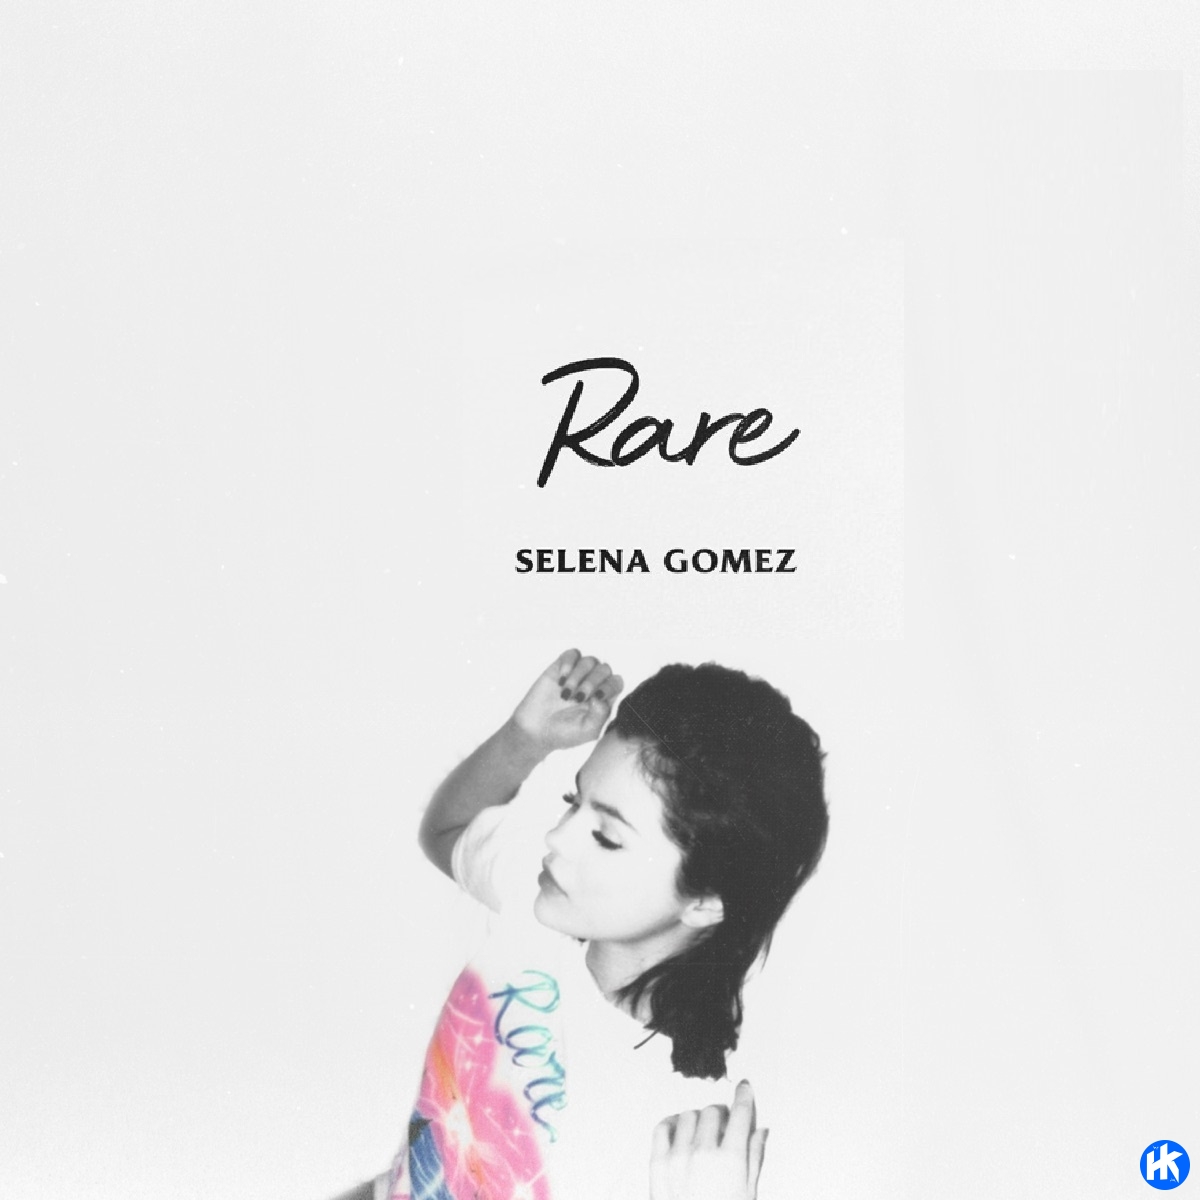 Selena Gomez – People You Know MP3 Download | HipHopKit